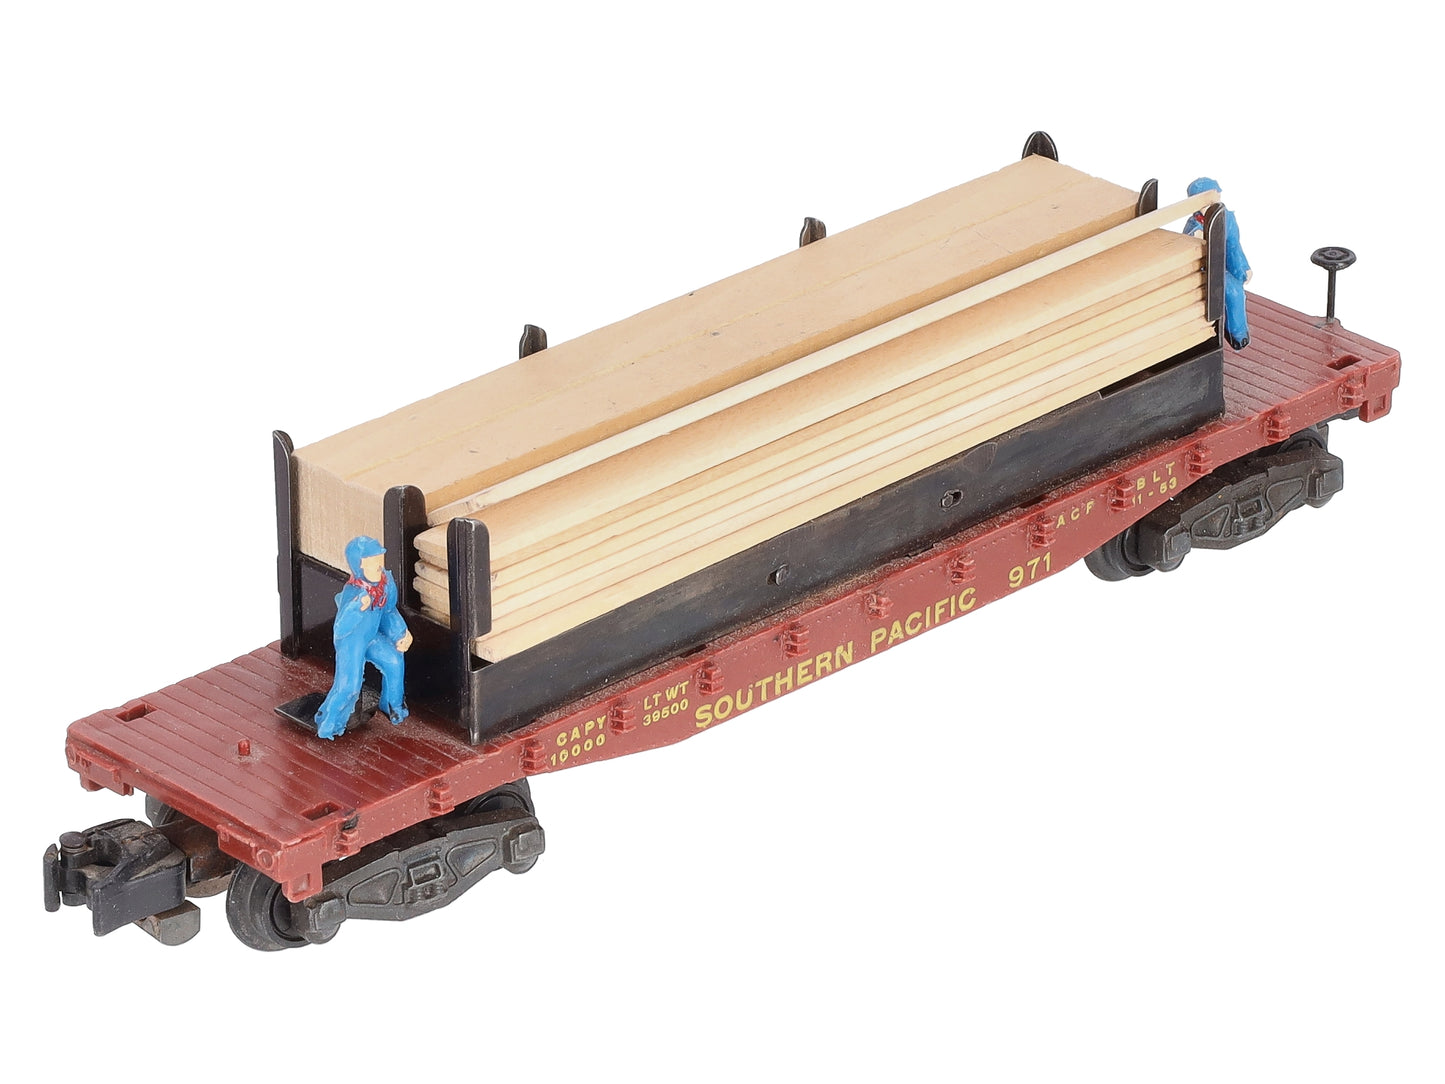 American Flyer 971 Vintage S Southern Pacific Lumber Unloading Car VG